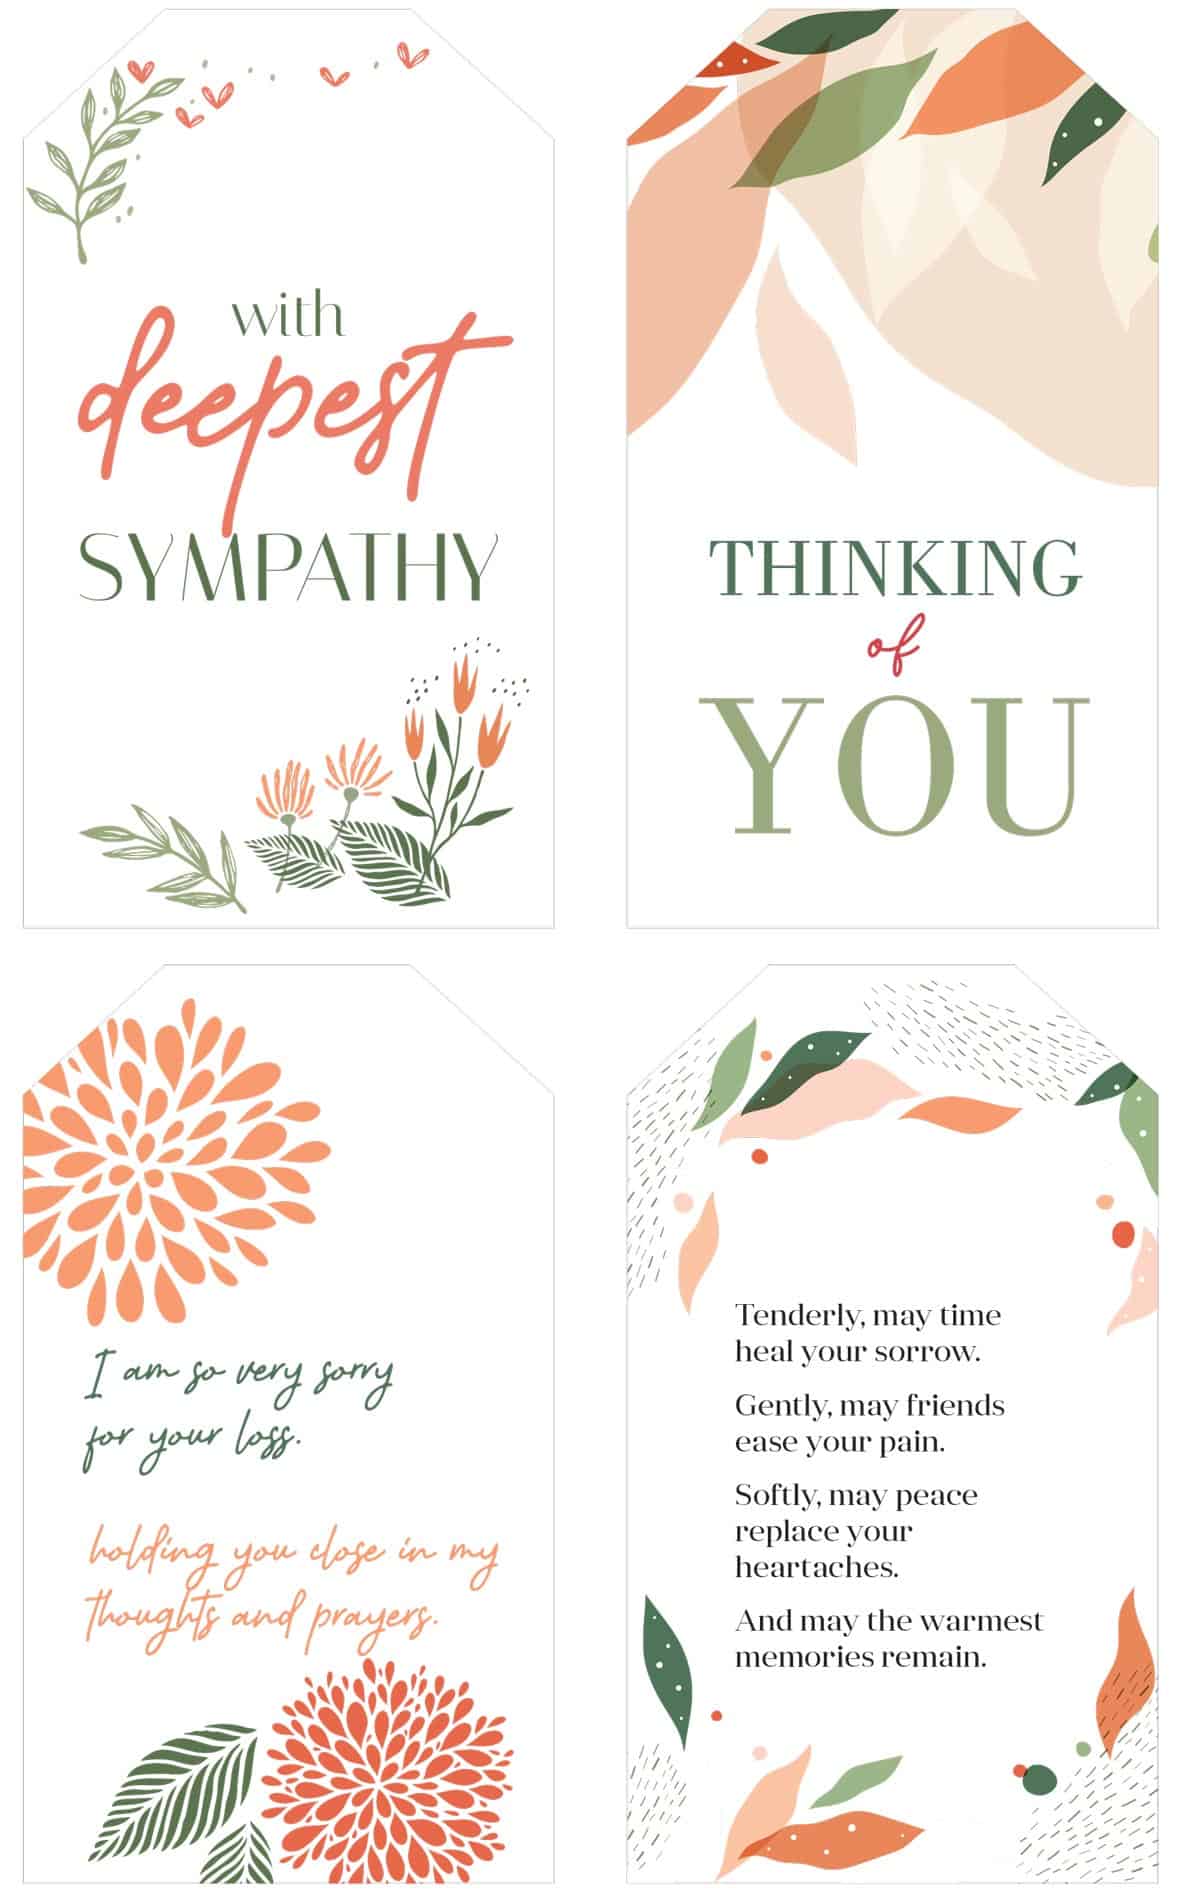 4 different sympathy tags ready to be printed from Skip to my Lou